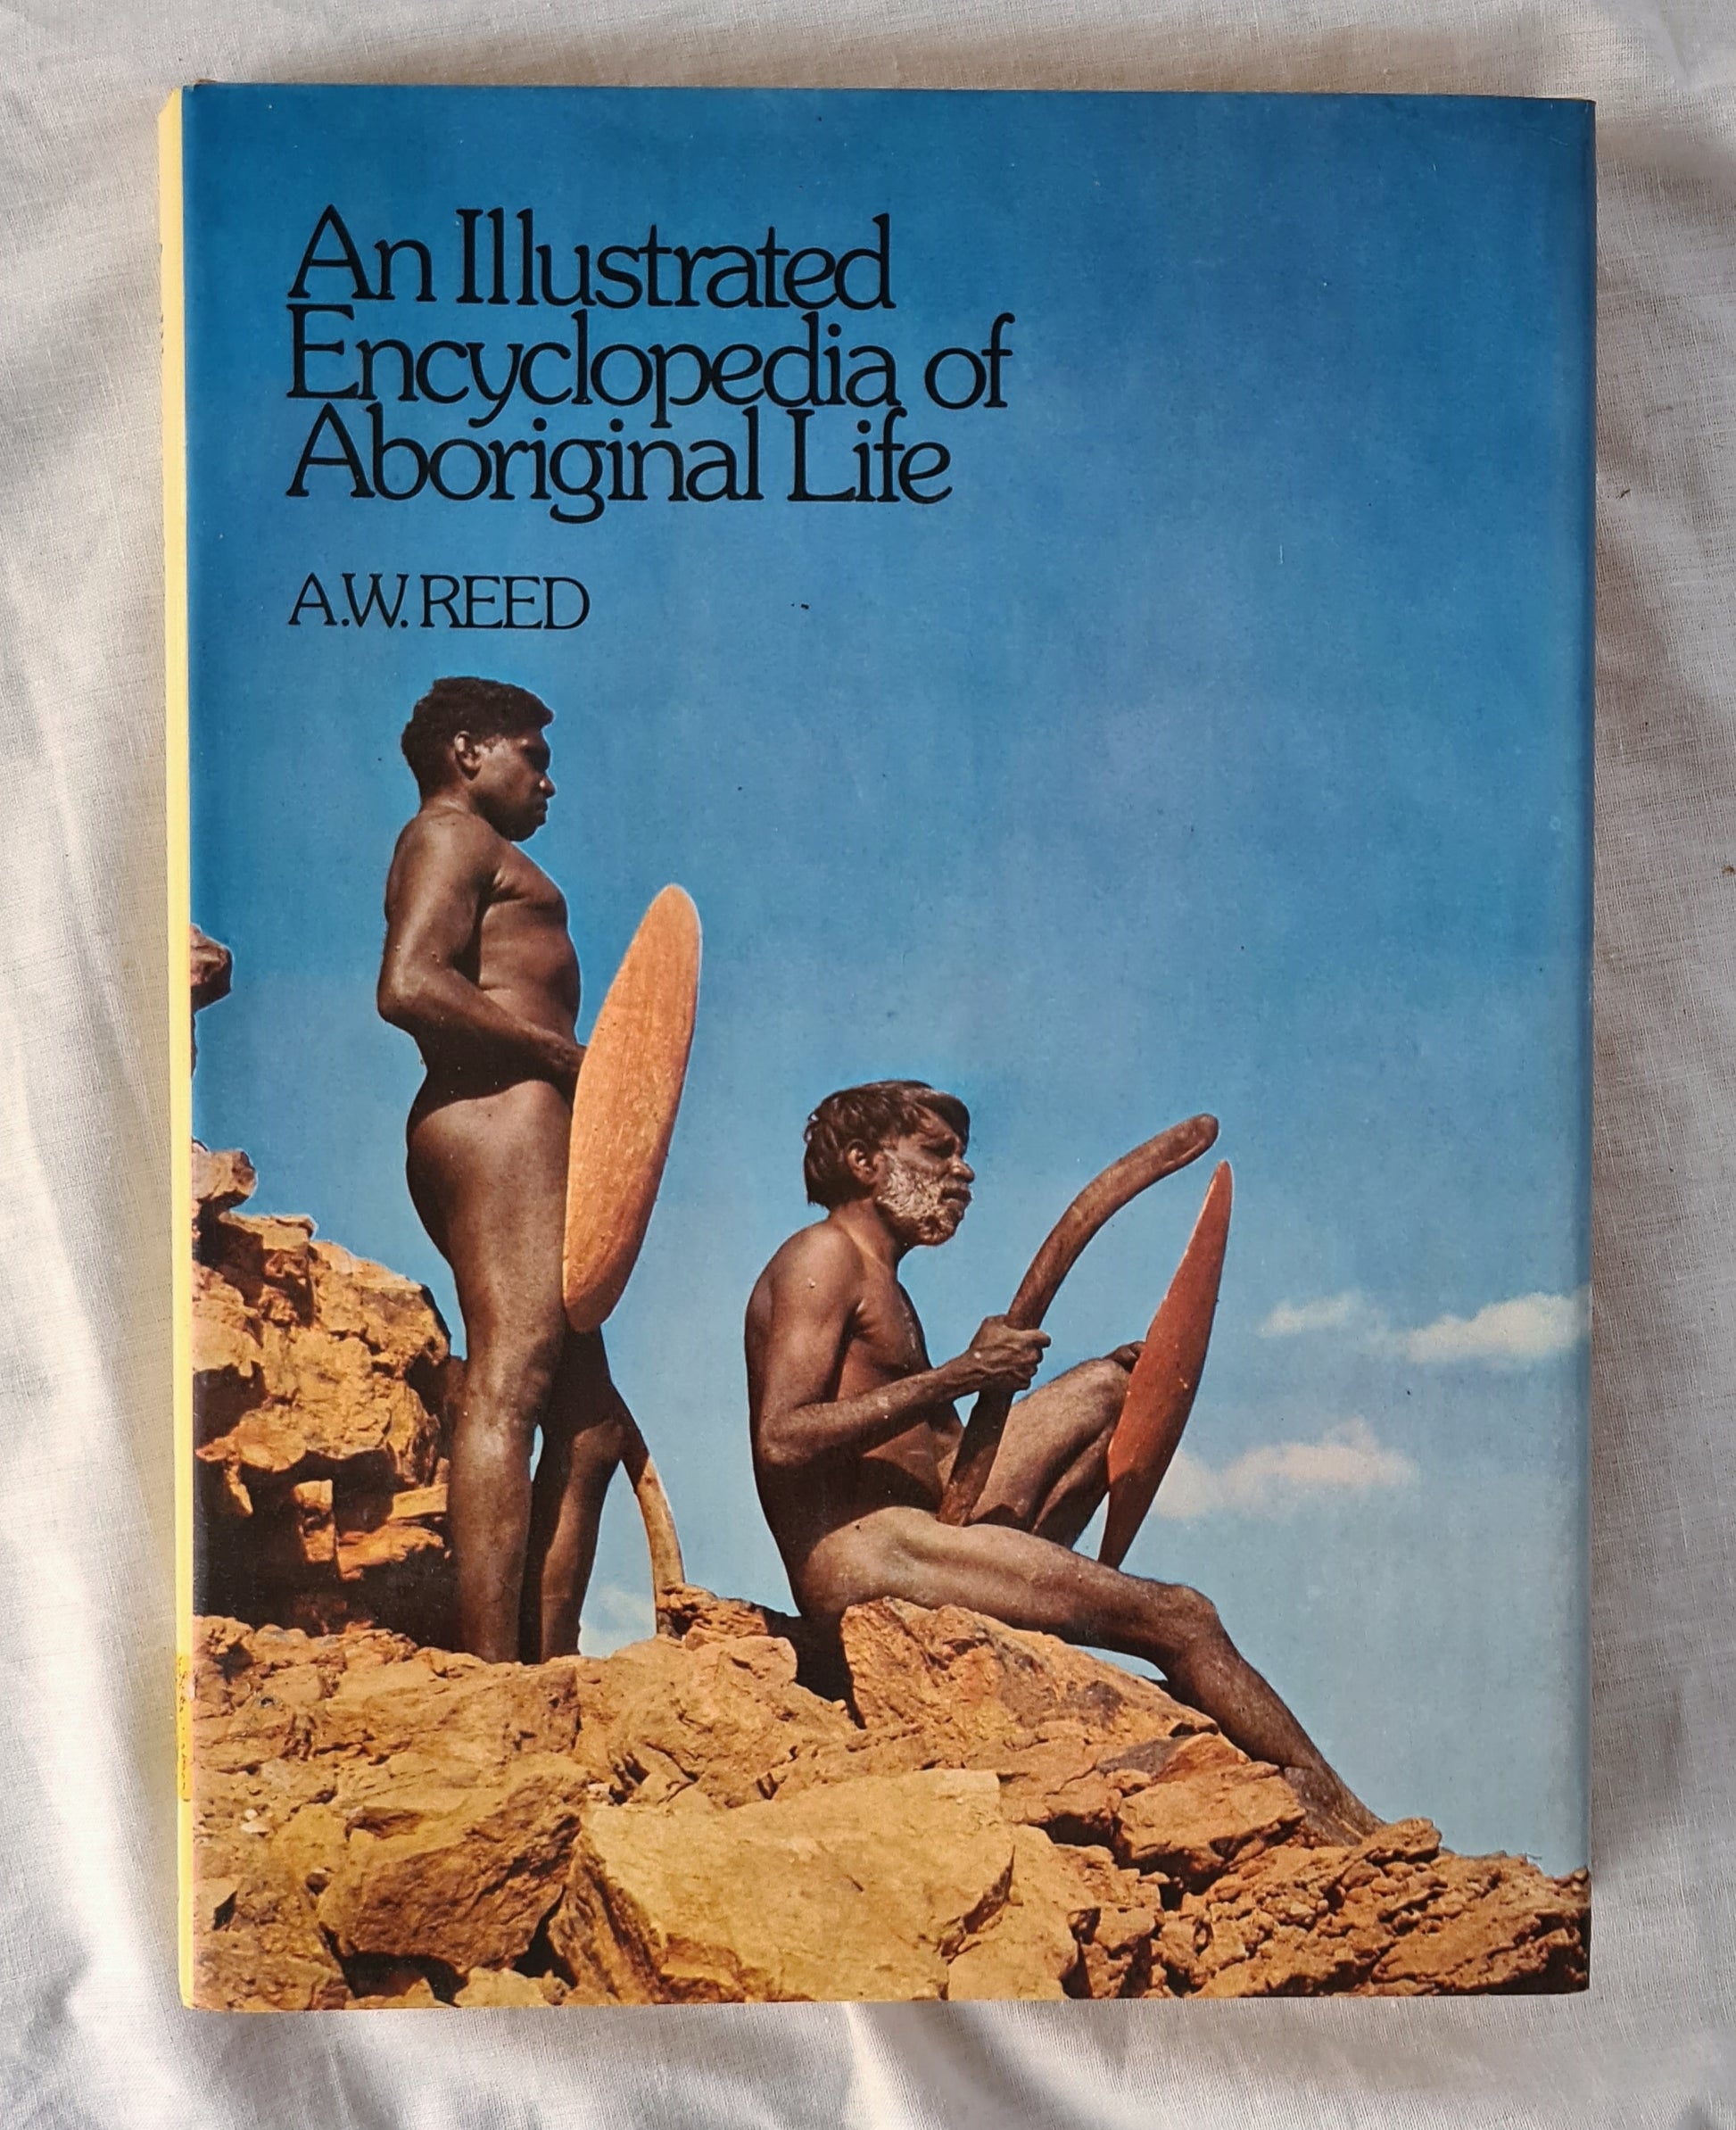 An Illustrated Encyclopedia of Aboriginal Life  by A. W. Reed  Illustrated by Ray Wenban and E. H. Papps